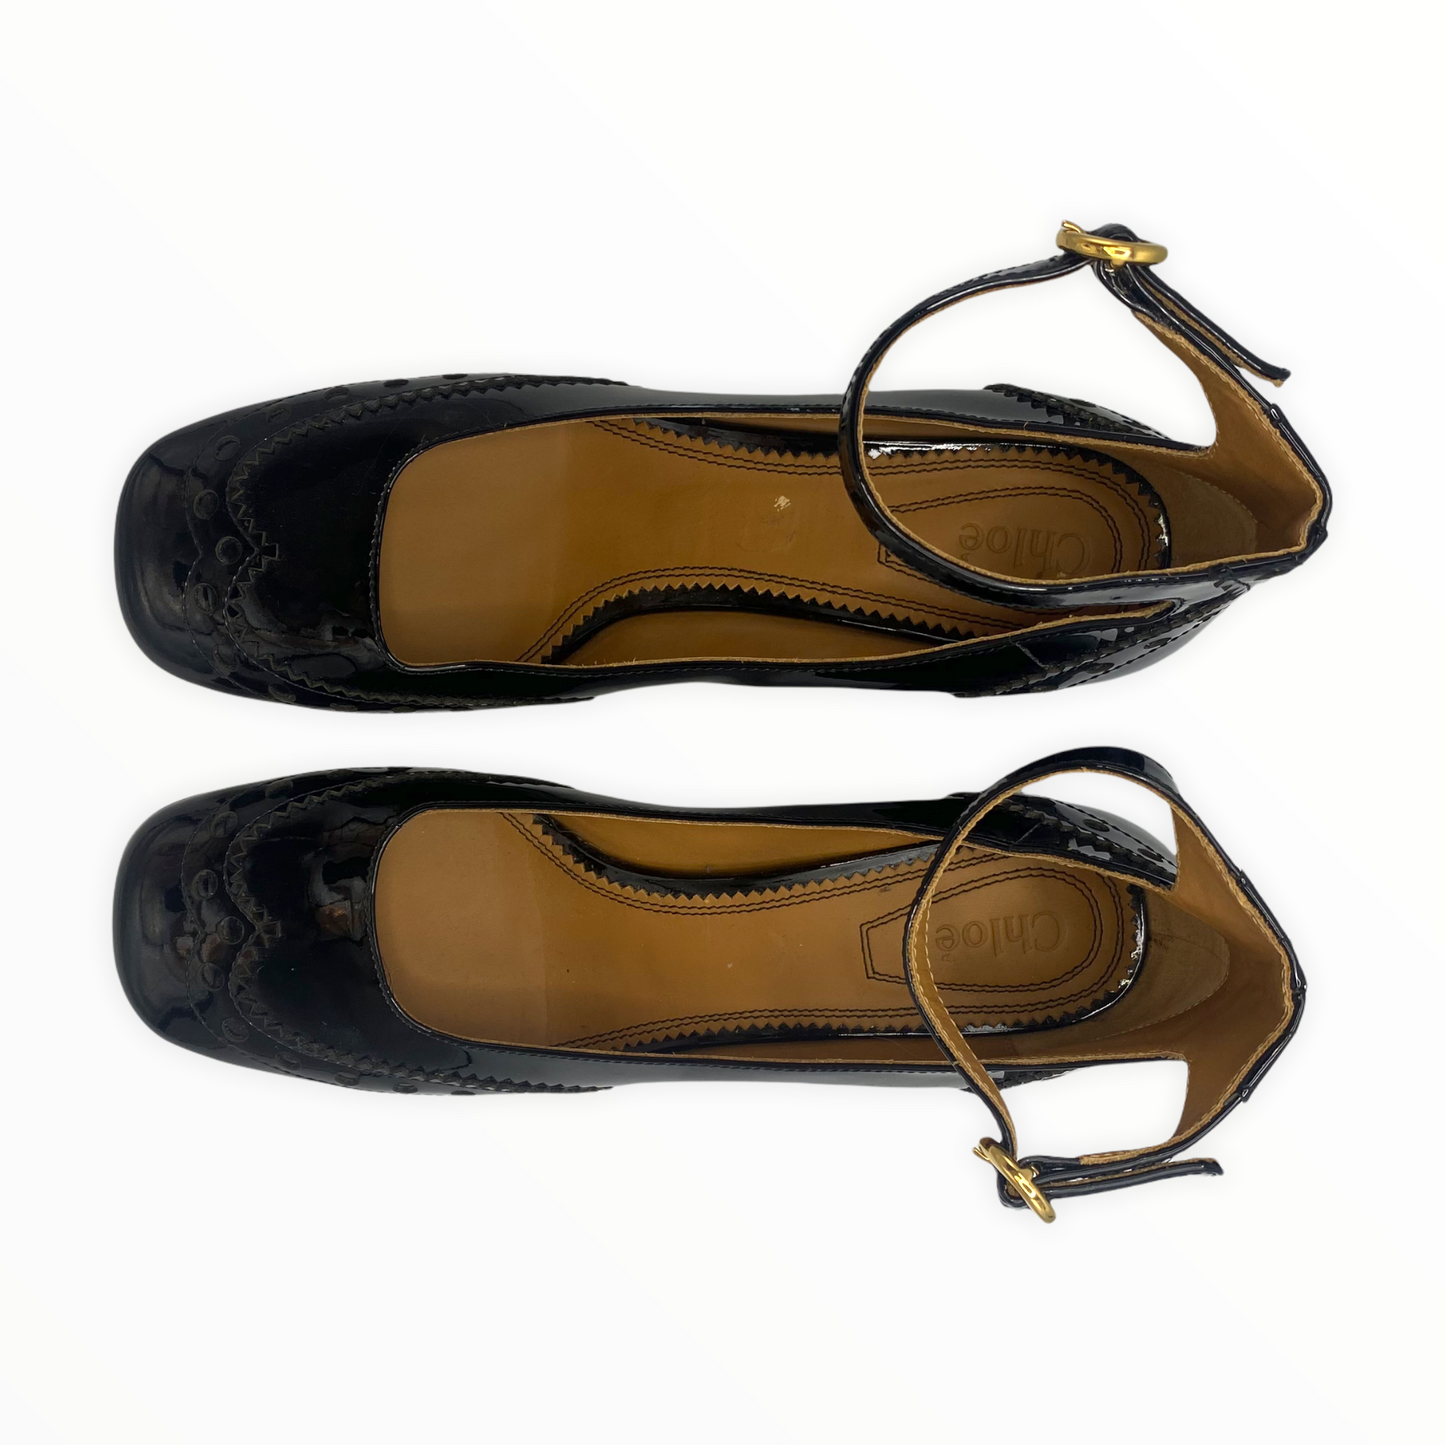 Lysis vintage Chloé patent leather babies - 38 - Fall 2017